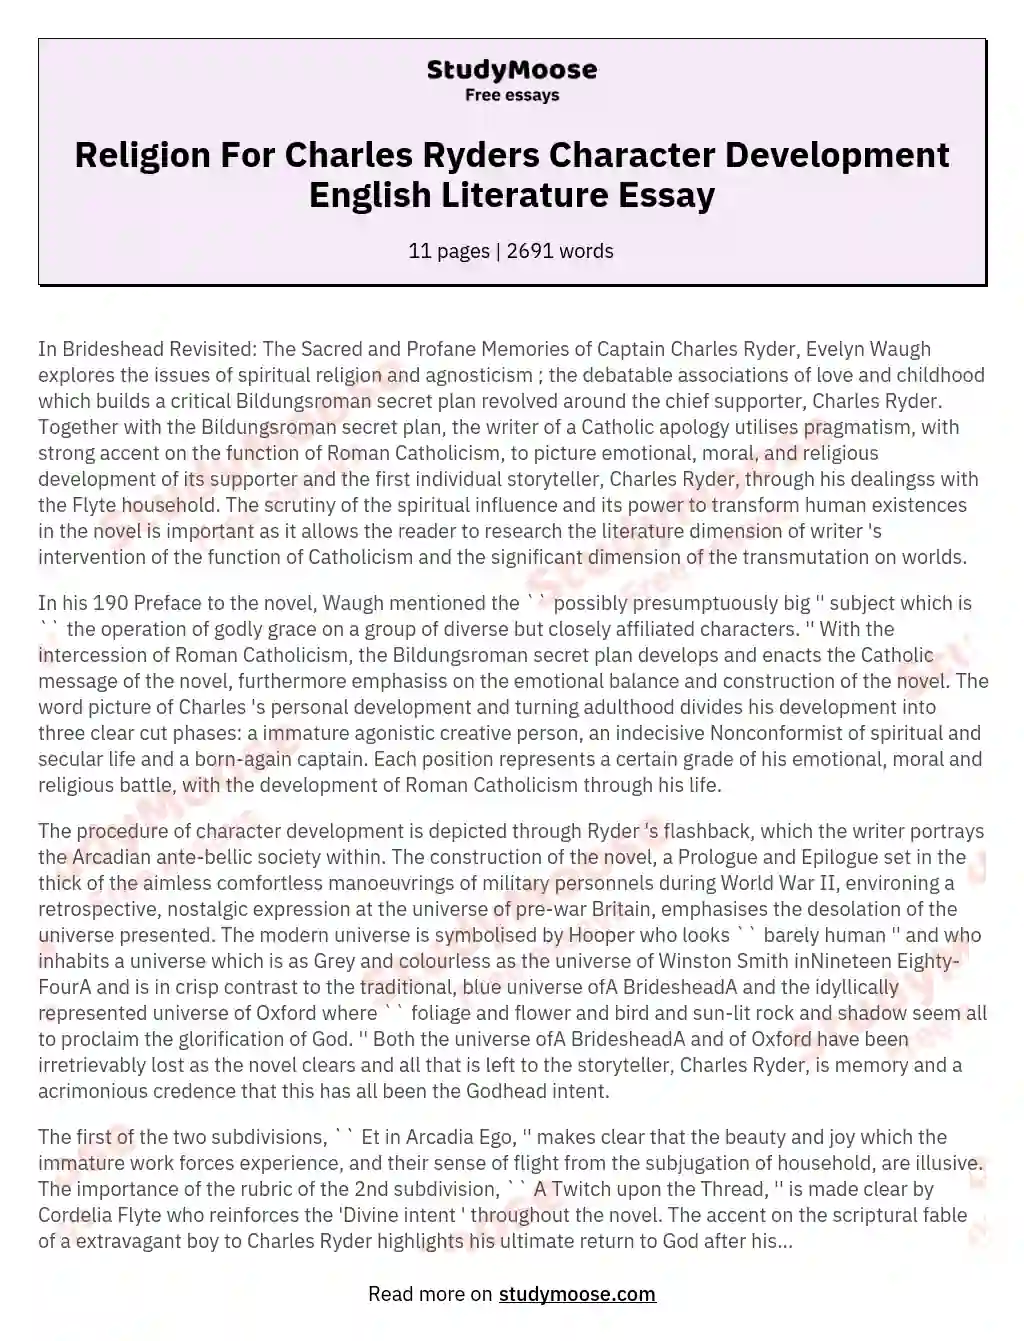 Religion For Charles Ryders Character Development English Literature Essay essay